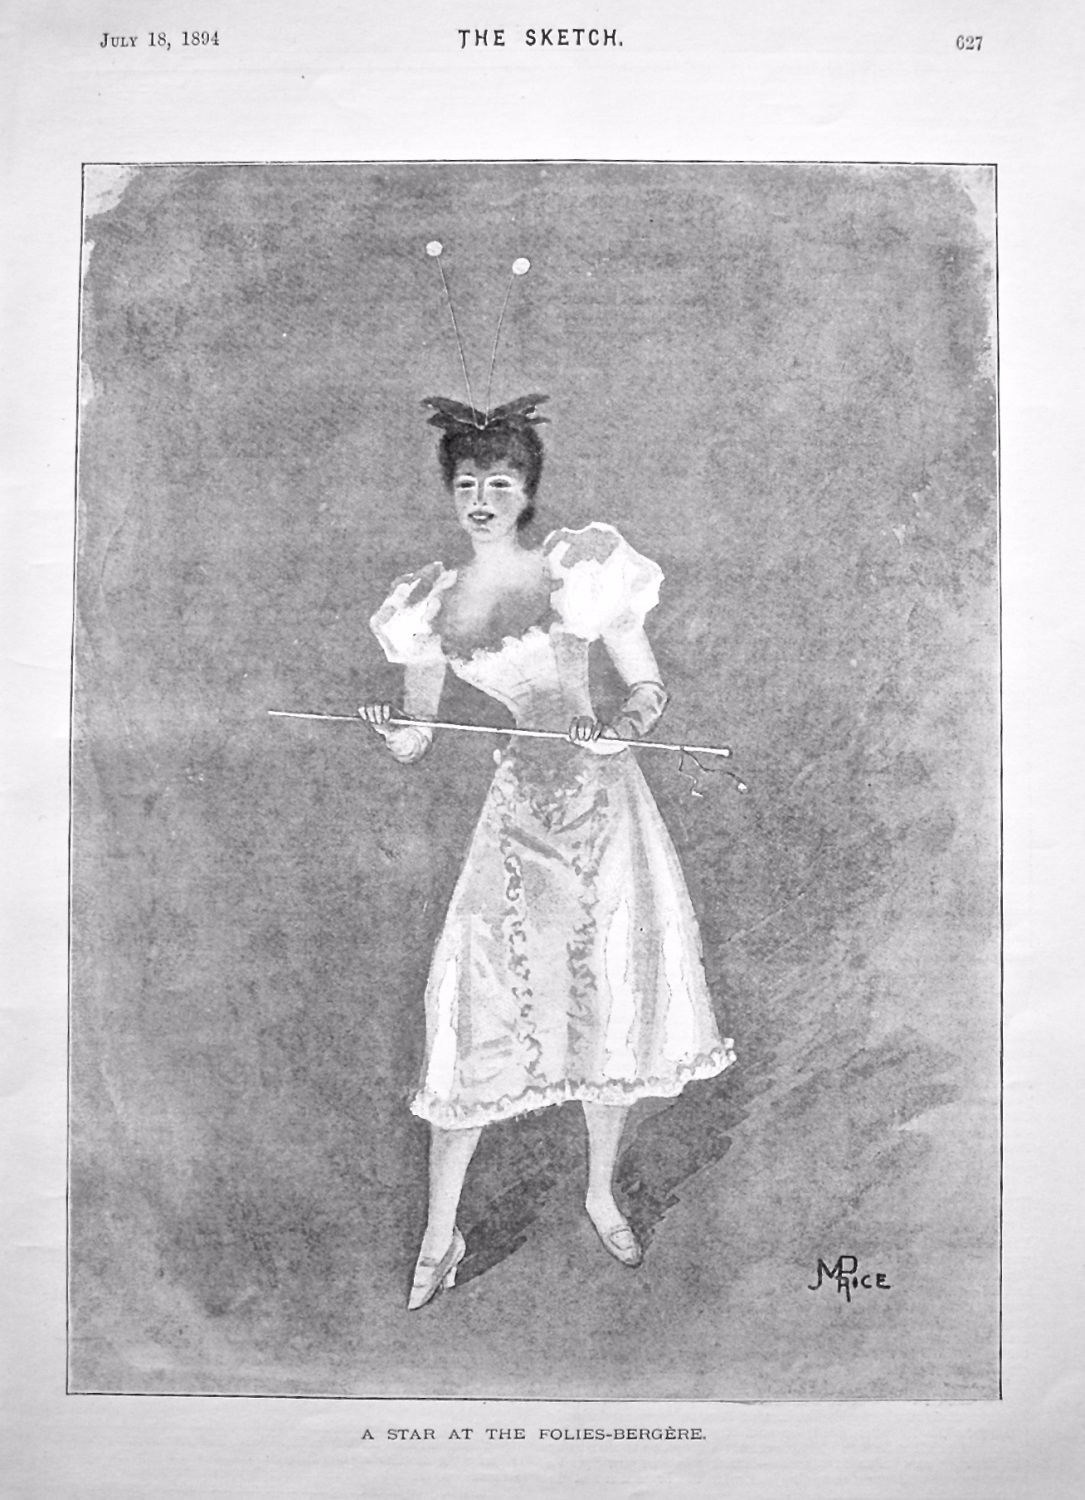 A Star at the Folies-Bergere. 1894.